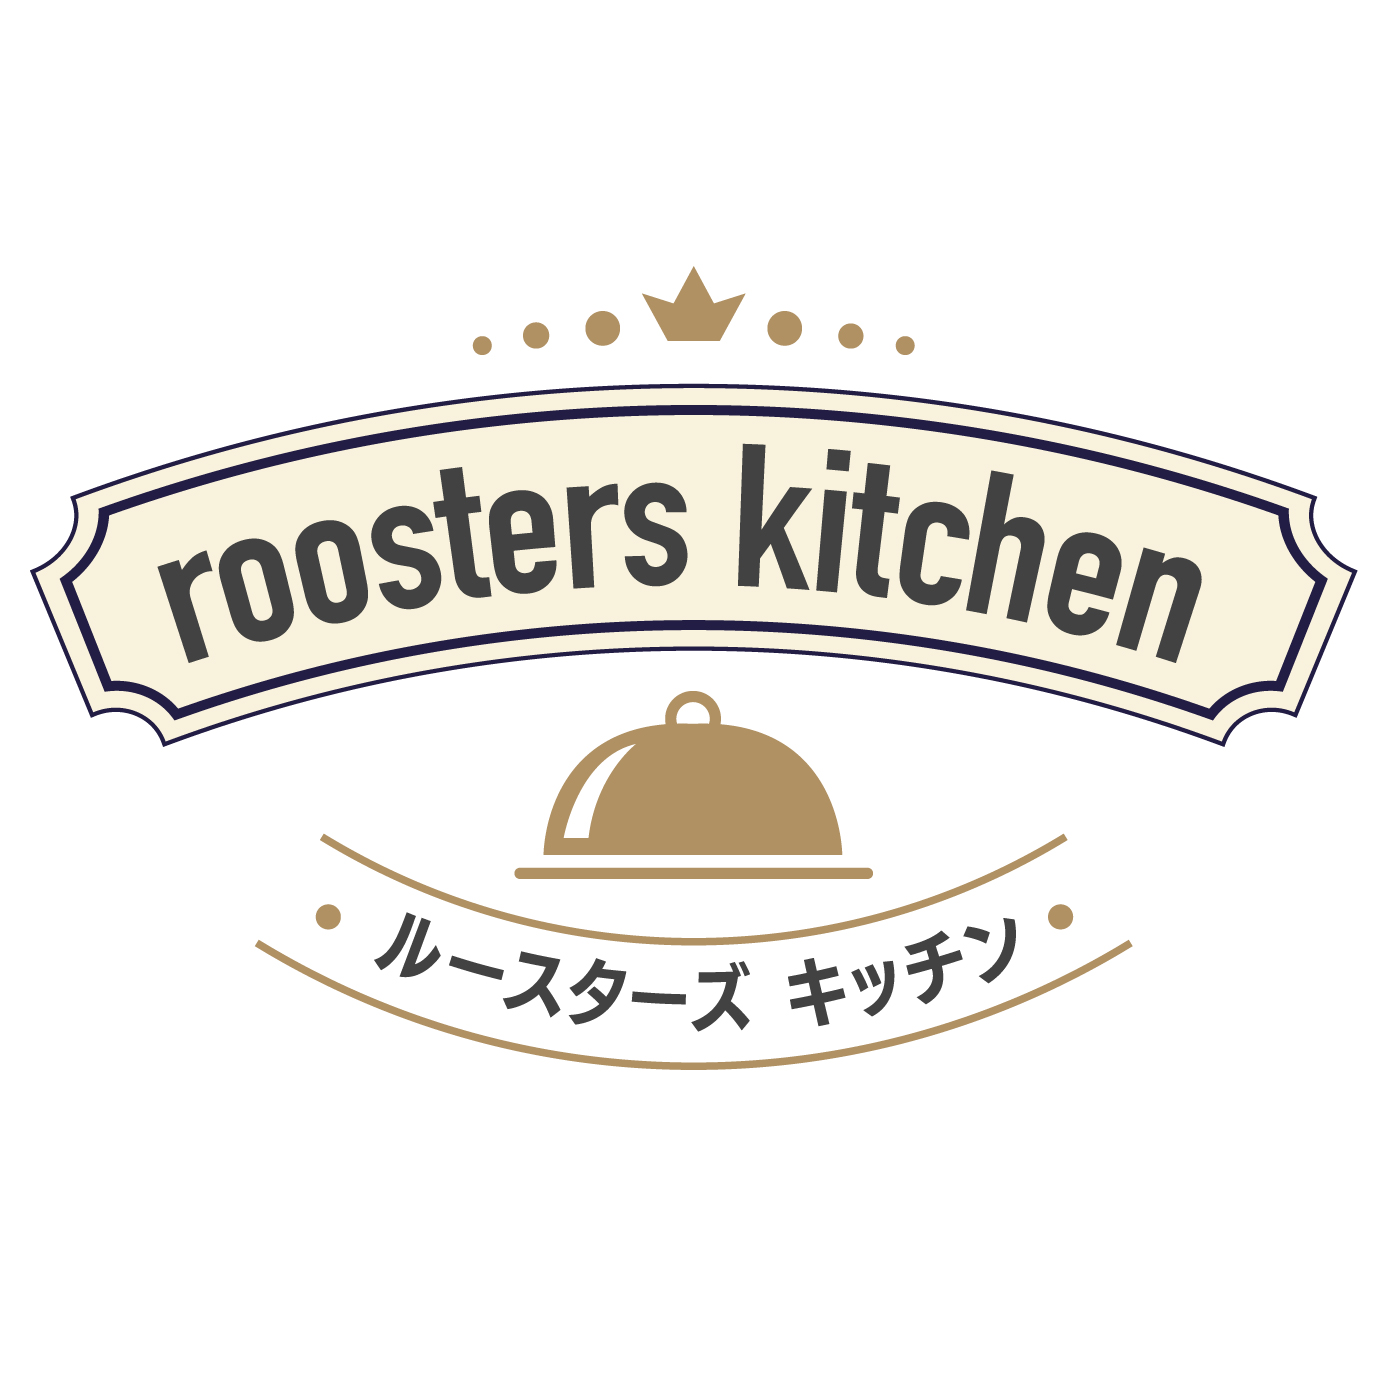 roosters kitchen ～ルースターズ キッチン～